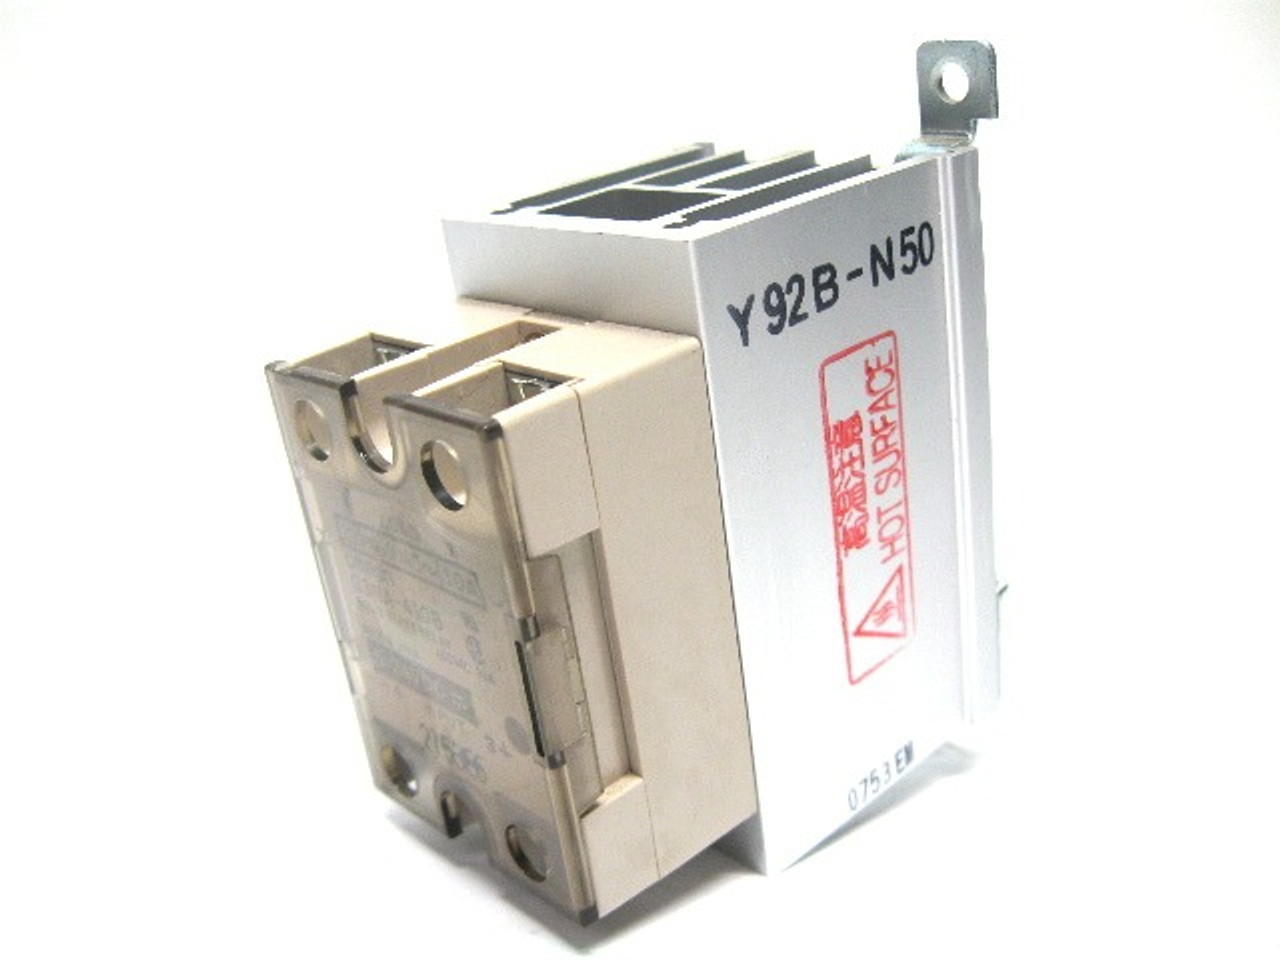 Omron G3NA-410B Solid State Relay 200-480 Vac With Y92B-N50 Heat Sink